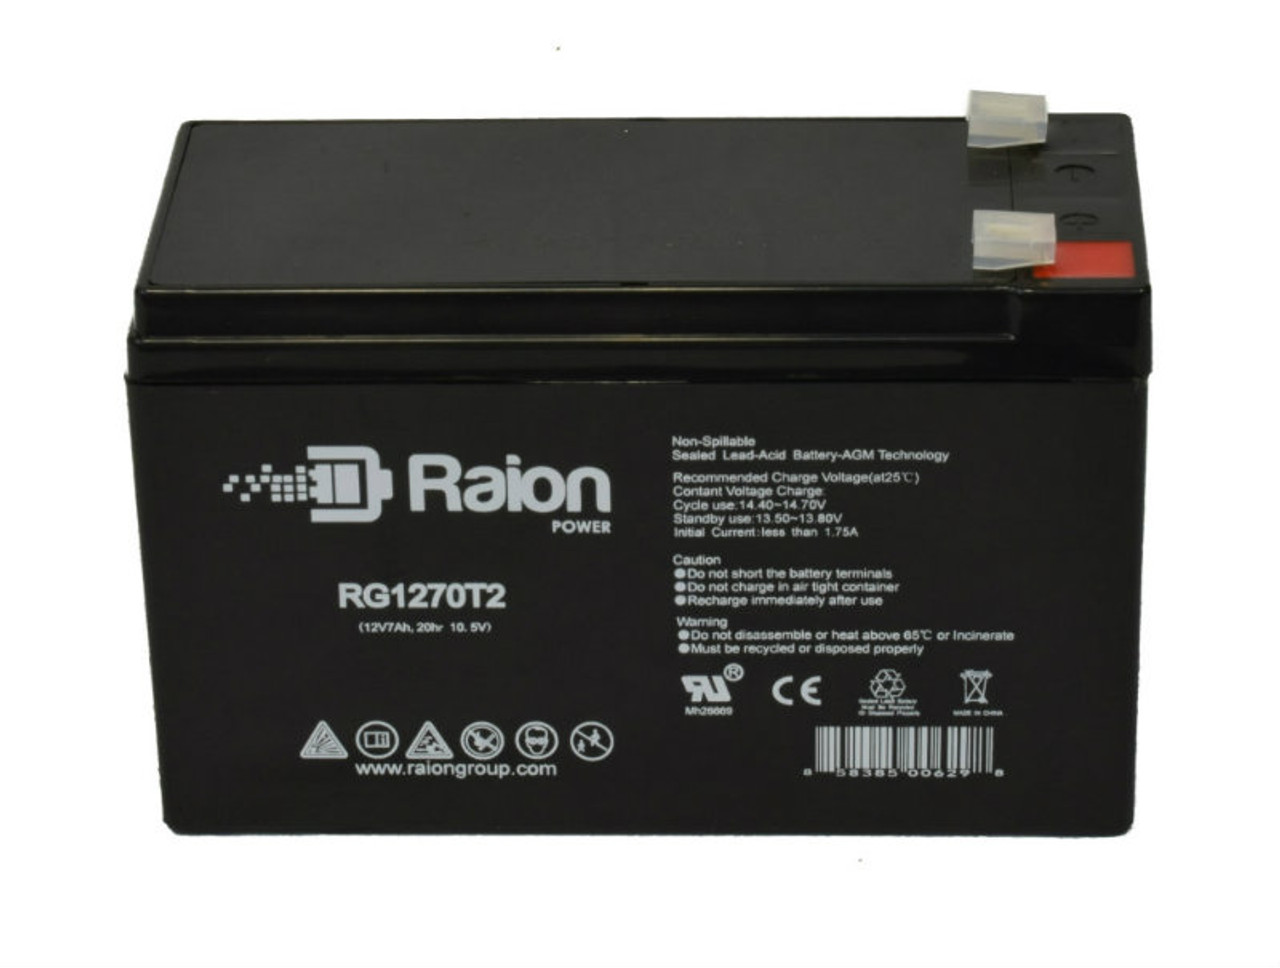 Raion Power RG1270T2 12V 7Ah Lead Acid Battery for Handicare Rembrandt Curved Stairlift